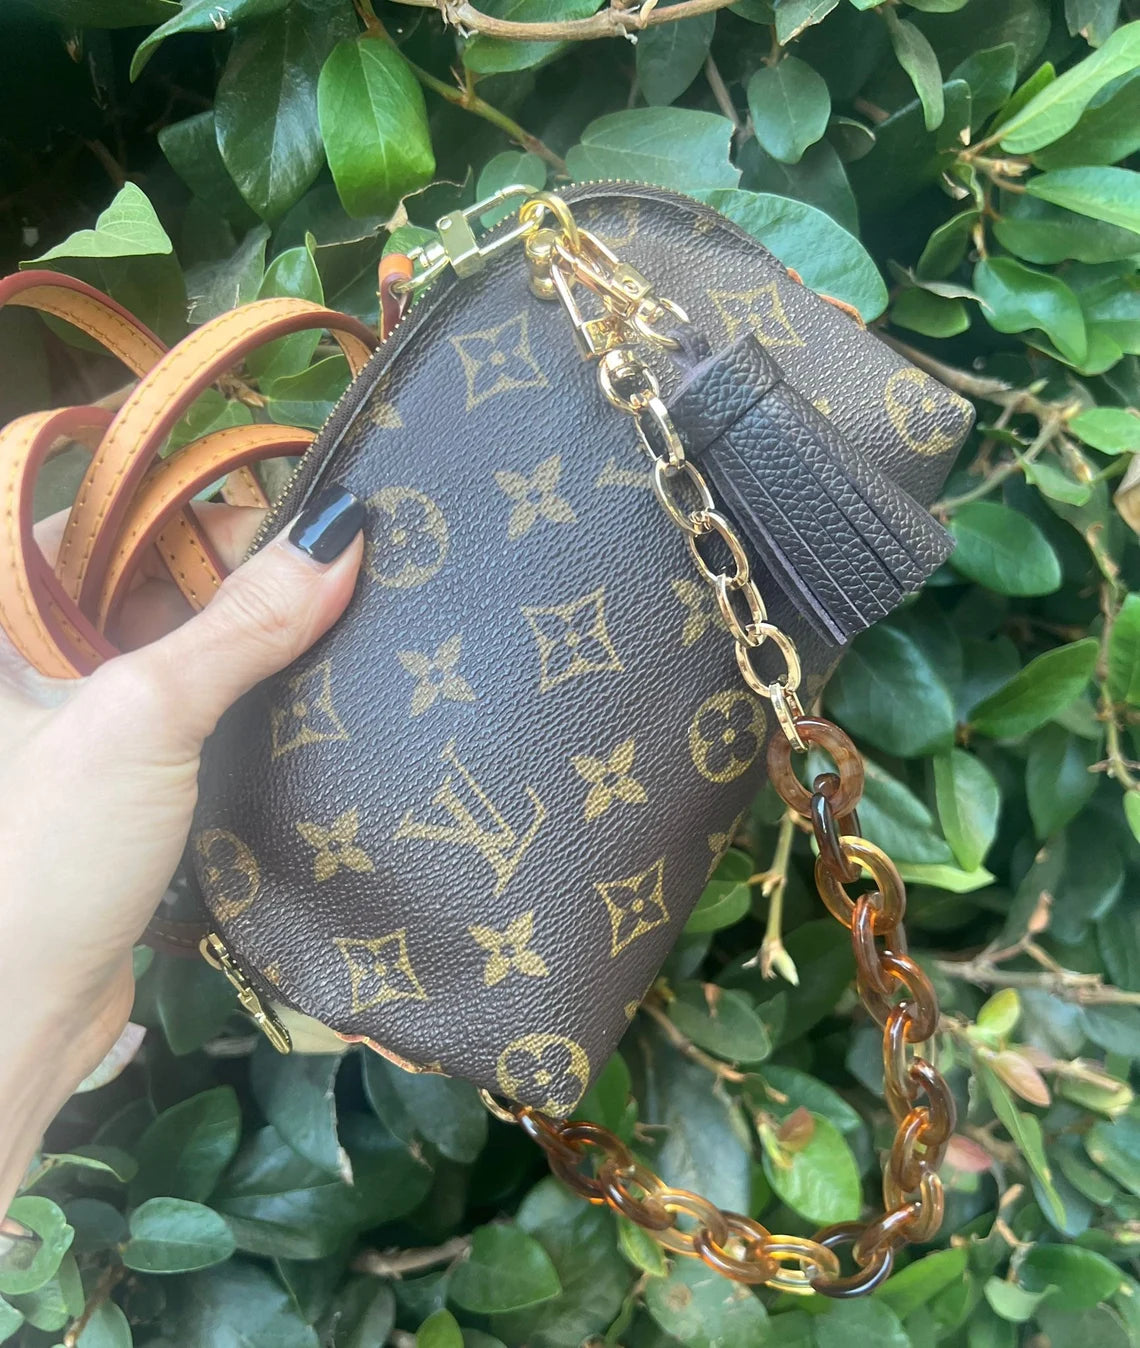 AUTHENTIC LOUIS VUITTON POUCH + Complimentary Accessories – Sexy